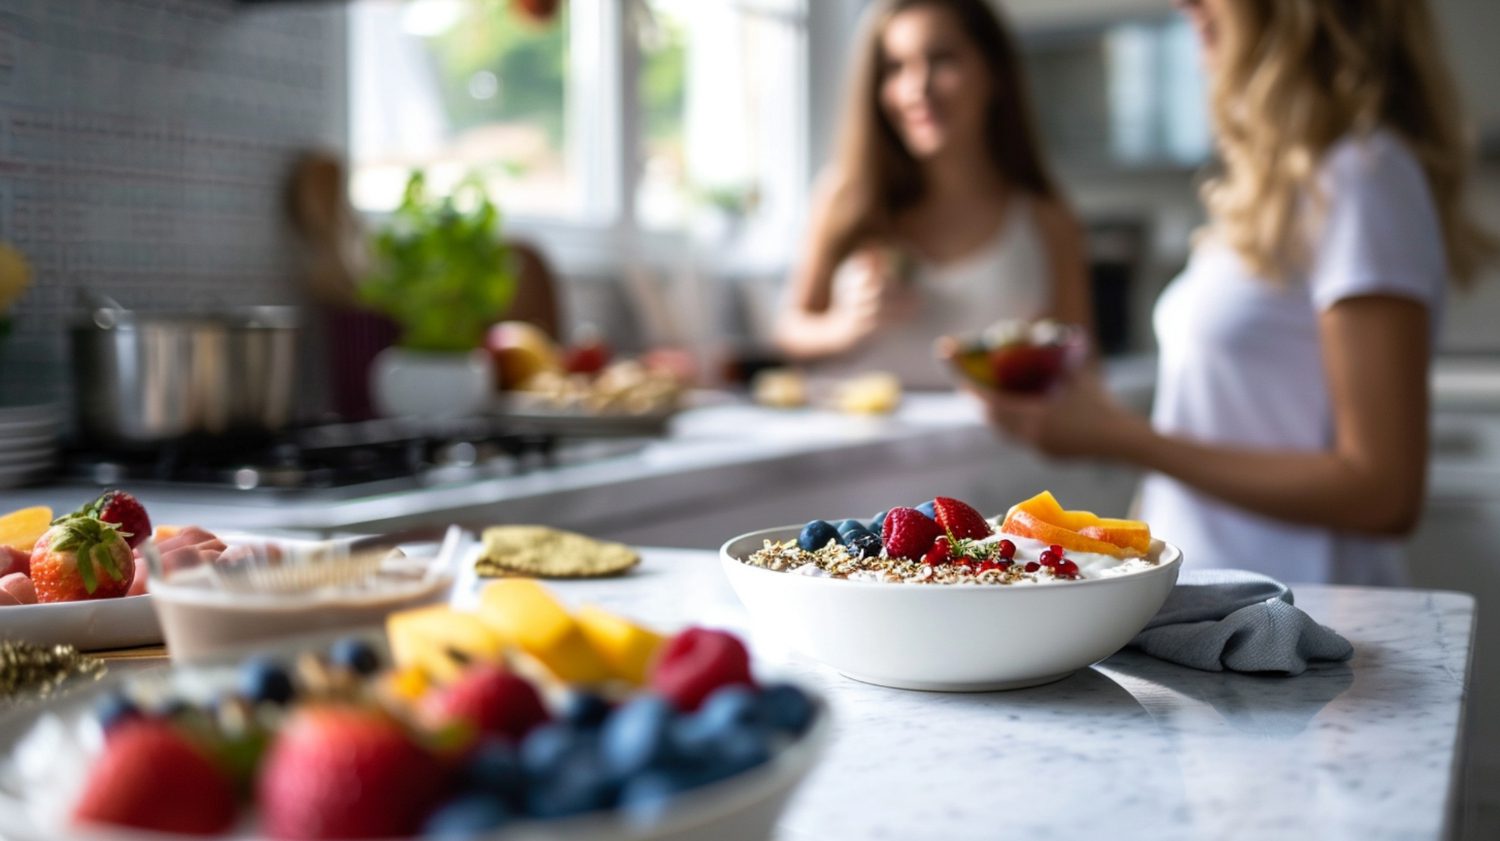 The Importance of Snacking: How a Nutrition Coach Can Help